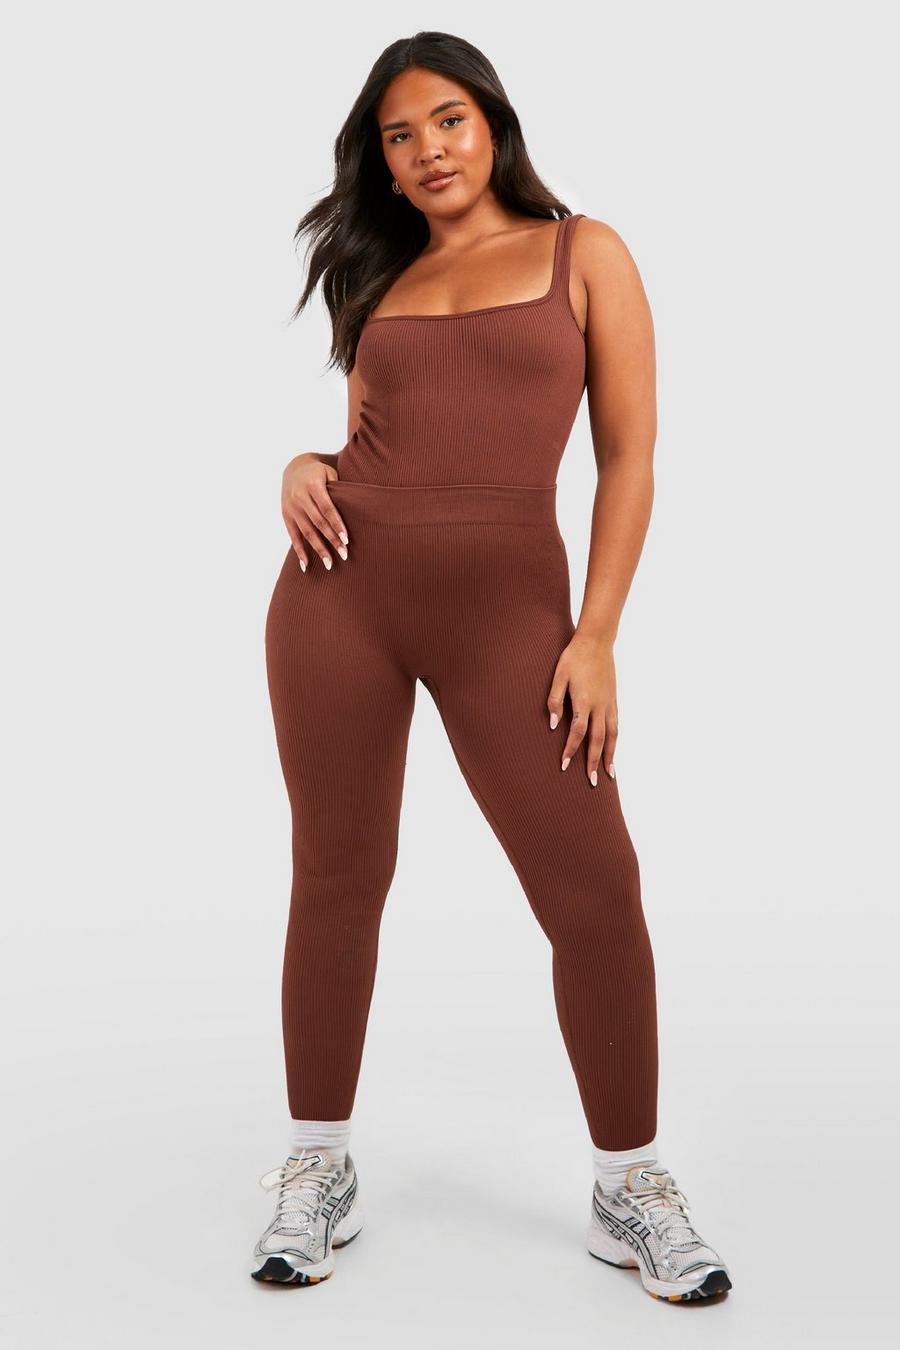 Chocolate brown Plus Structured Seamless Contour Ribbed Leggings